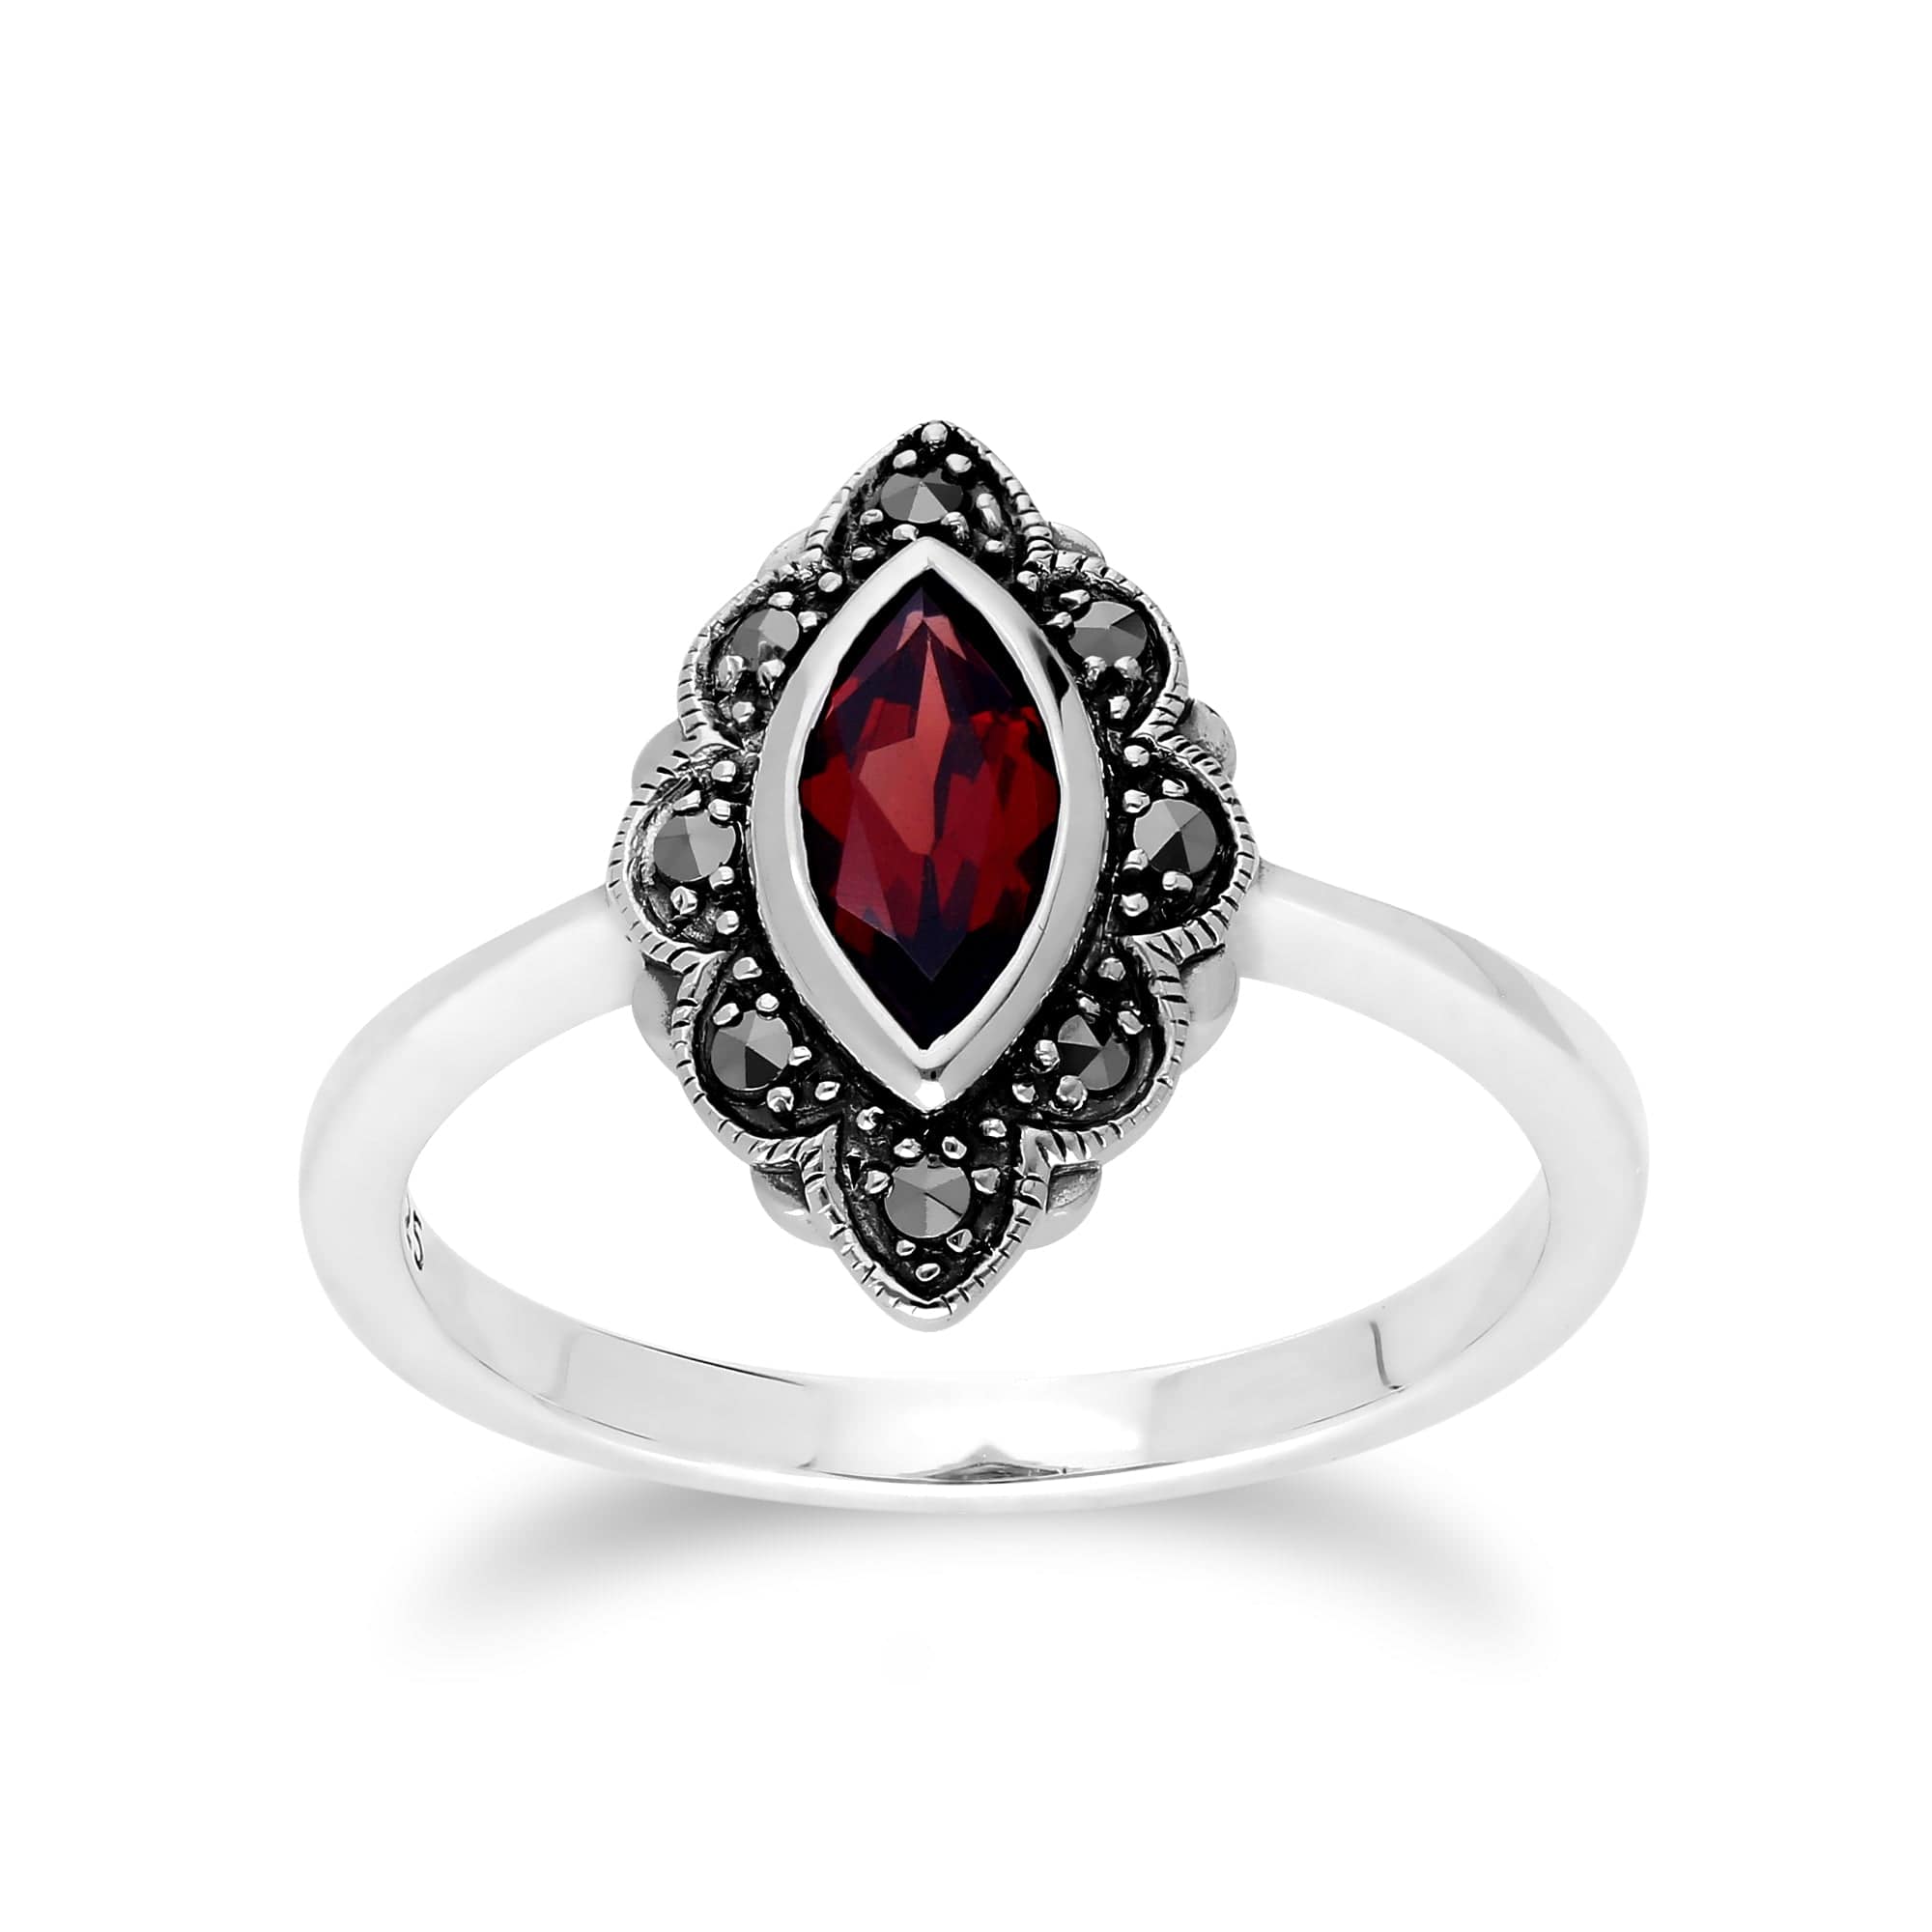 214R597205925 Art Nouveau Style Marquise Garnet & Marcasite Leaf Ring in 925 Sterling Silver 1